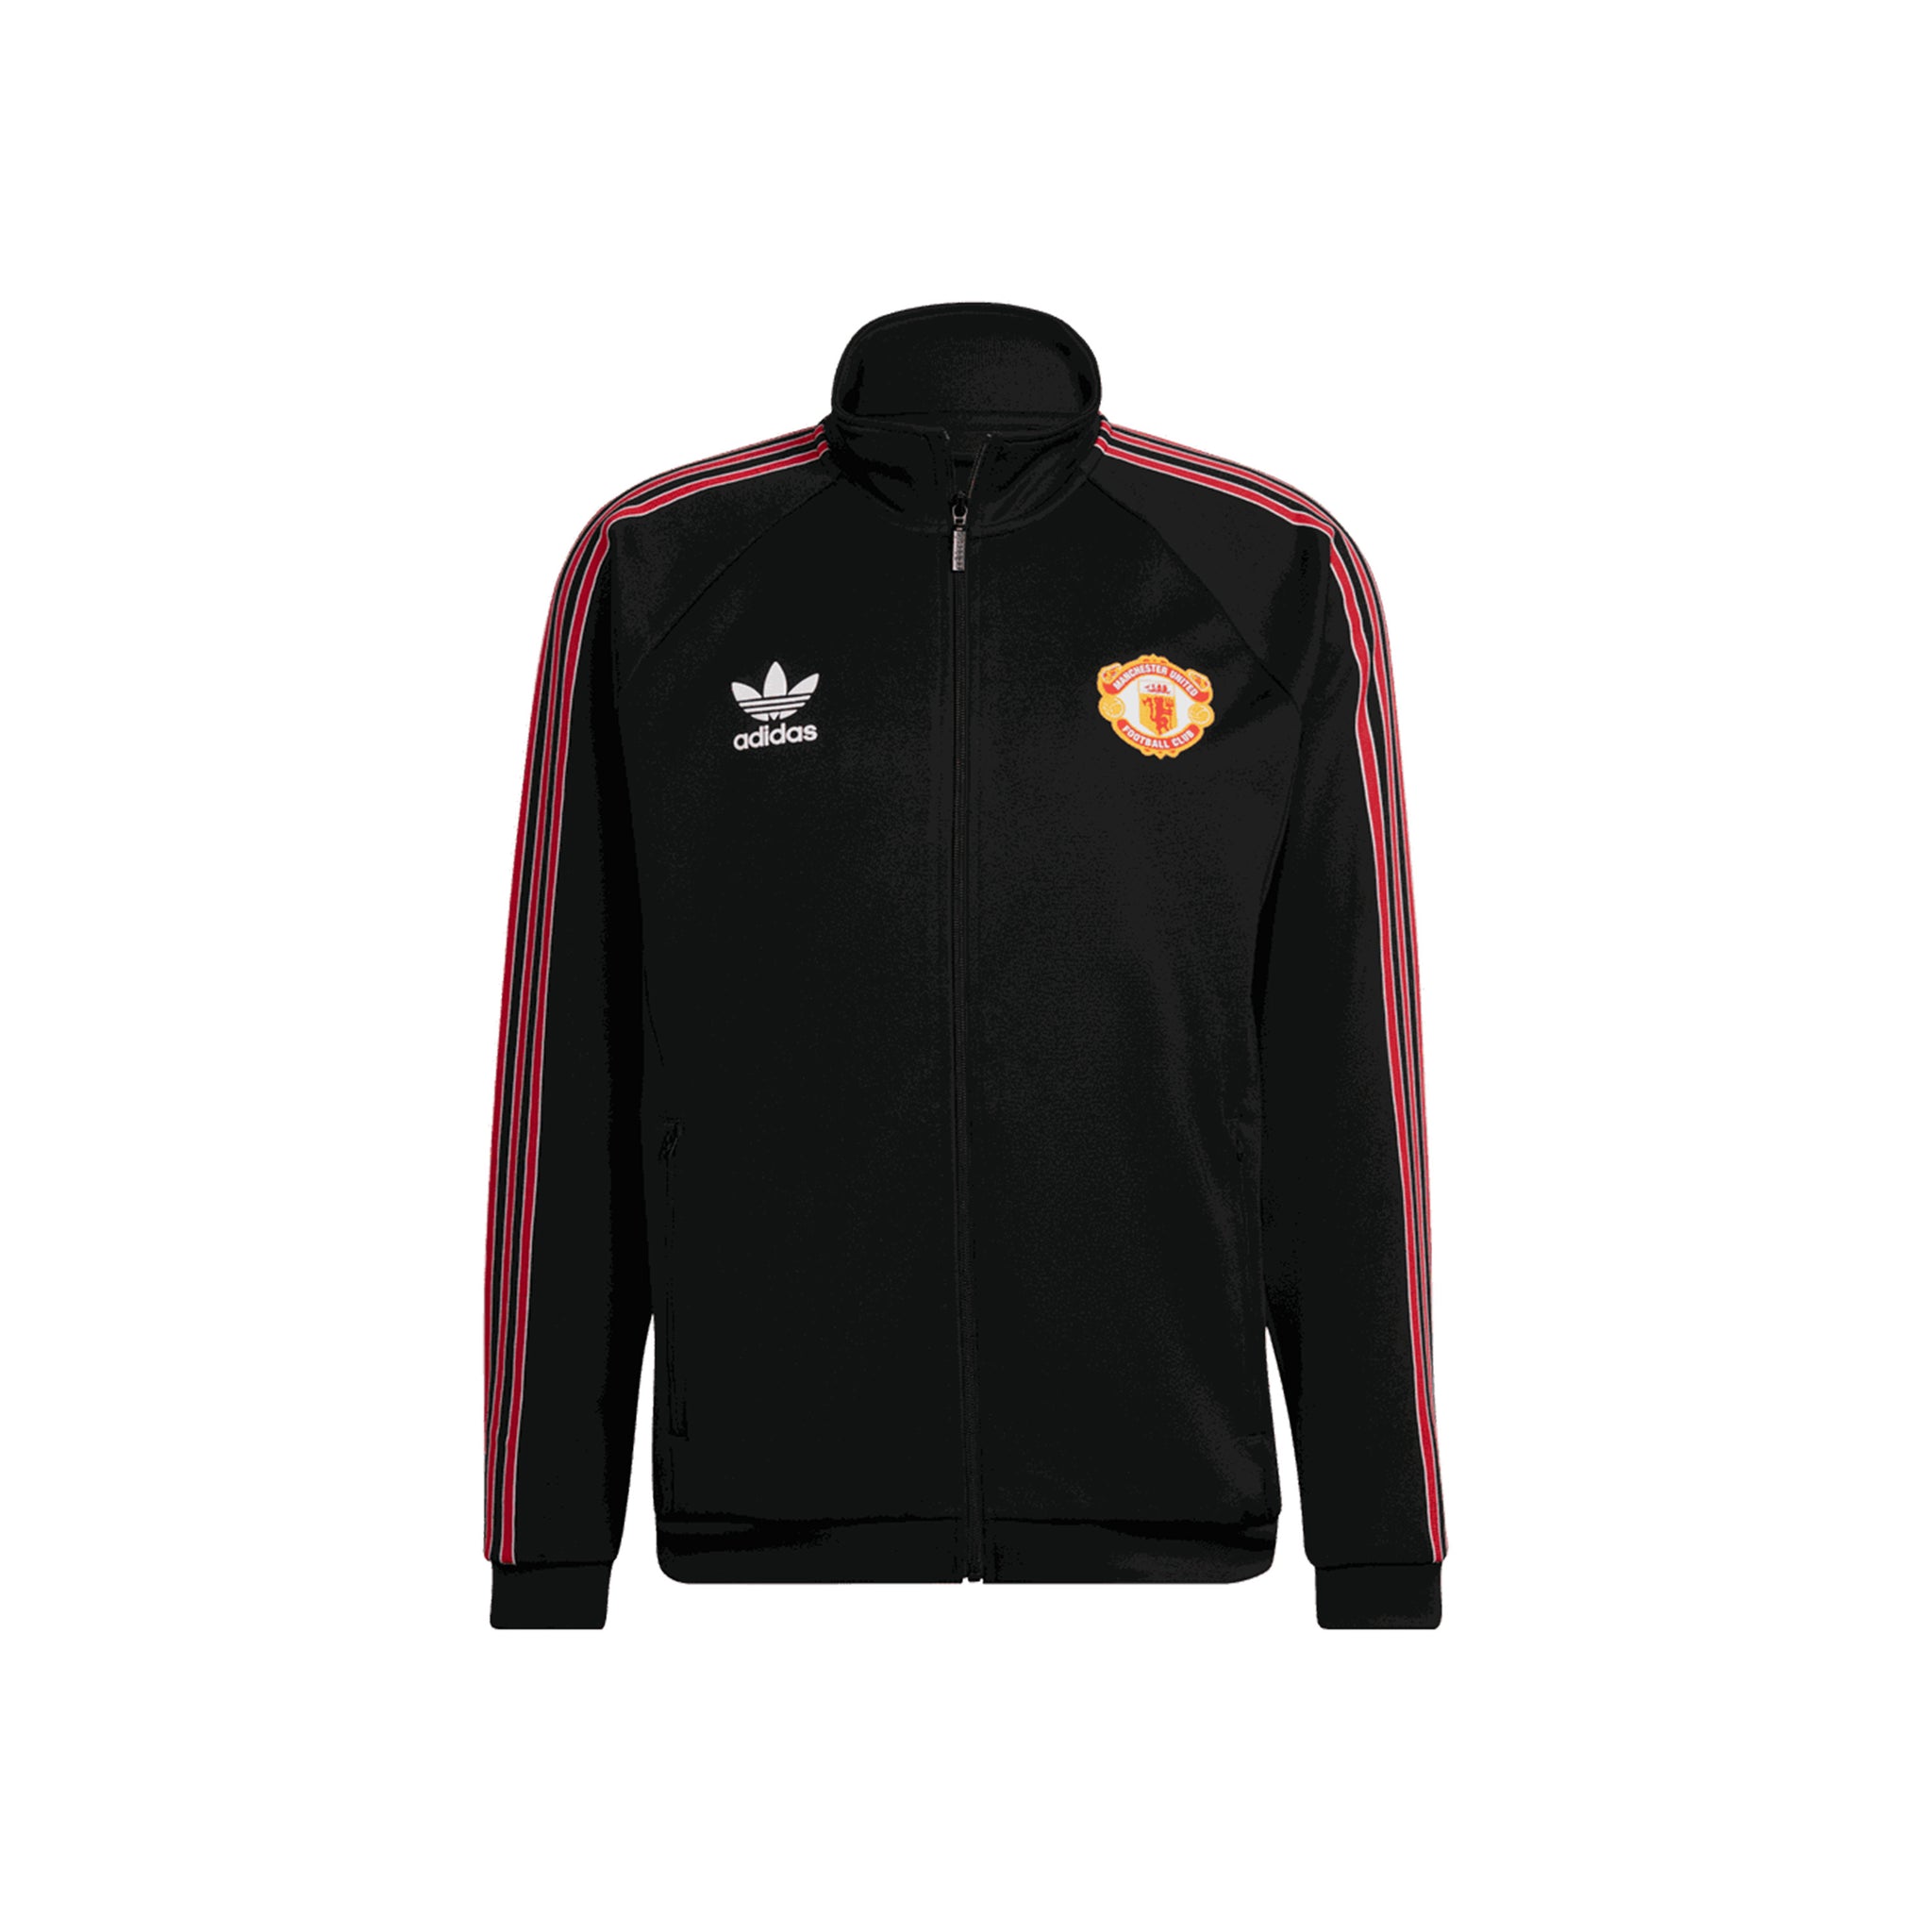 ADIDAS Manchester United FC Track Top Jacket 22/23